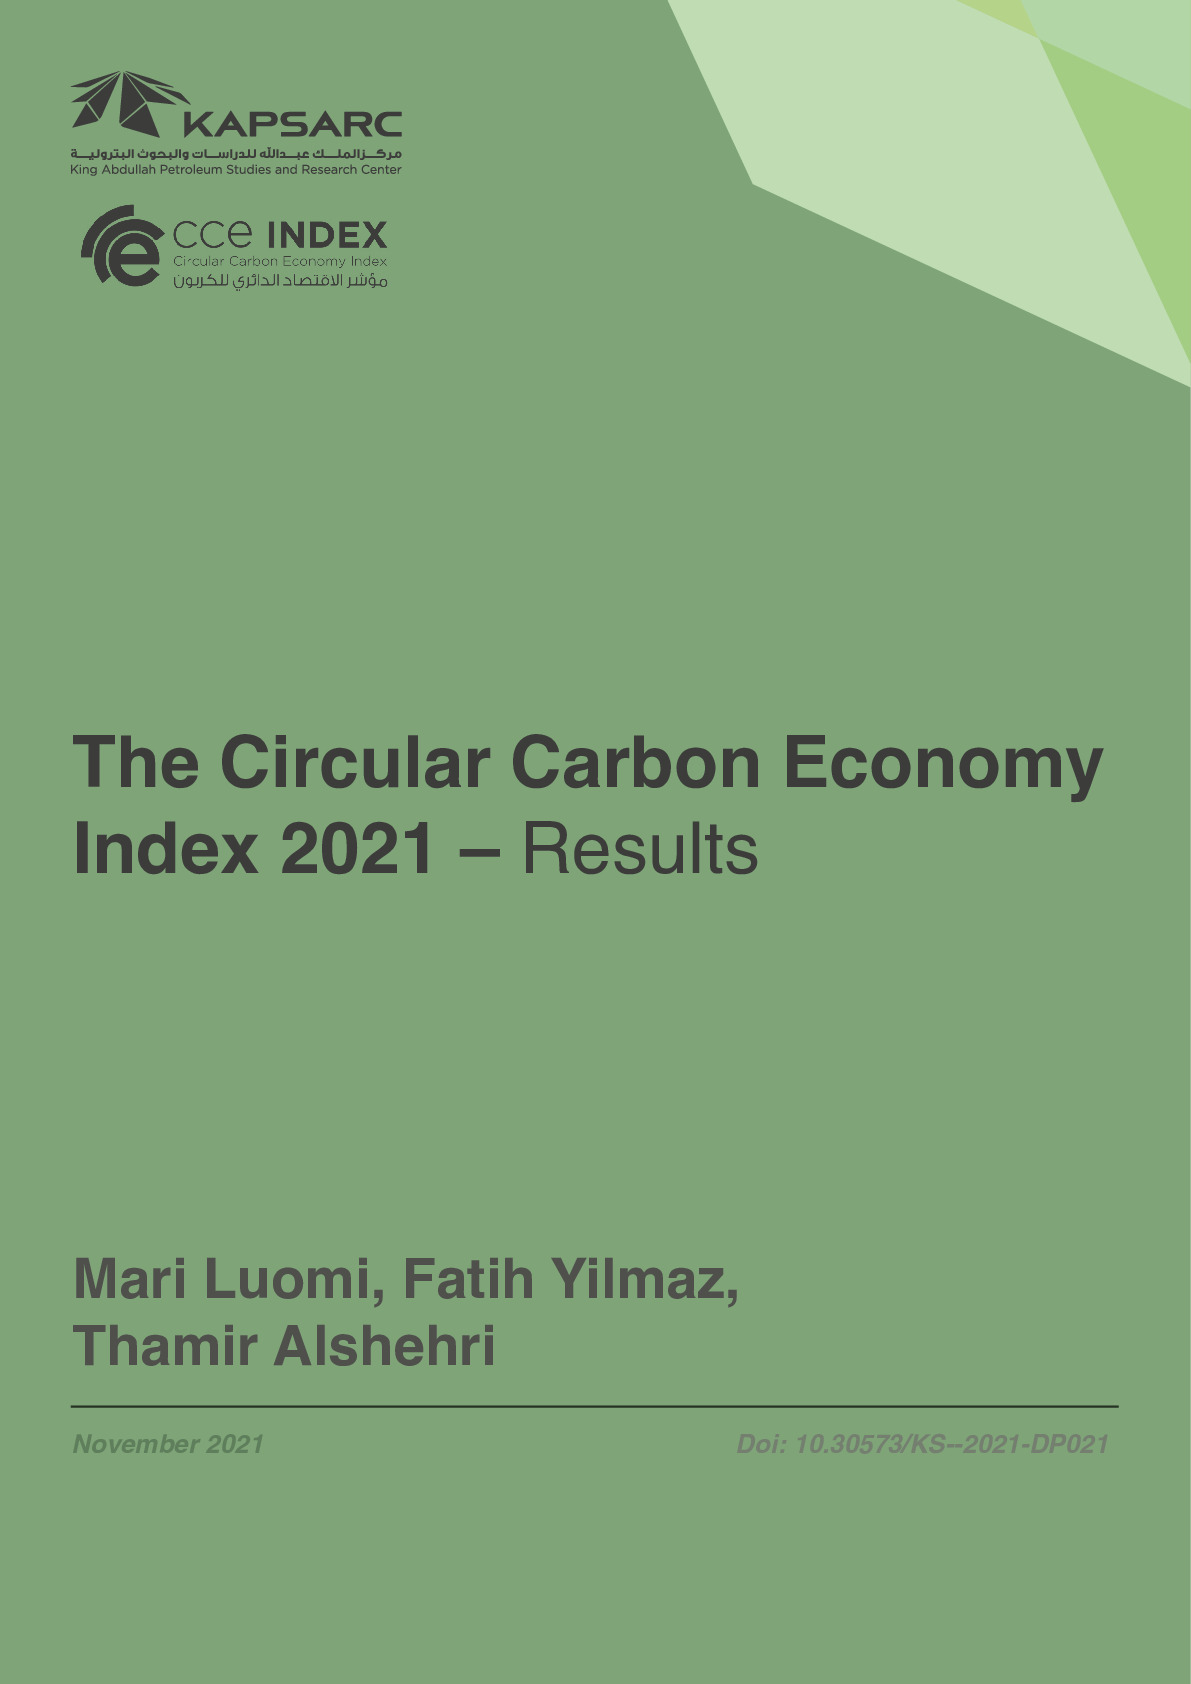 The Circular Carbon Economy Index 2021 – Results